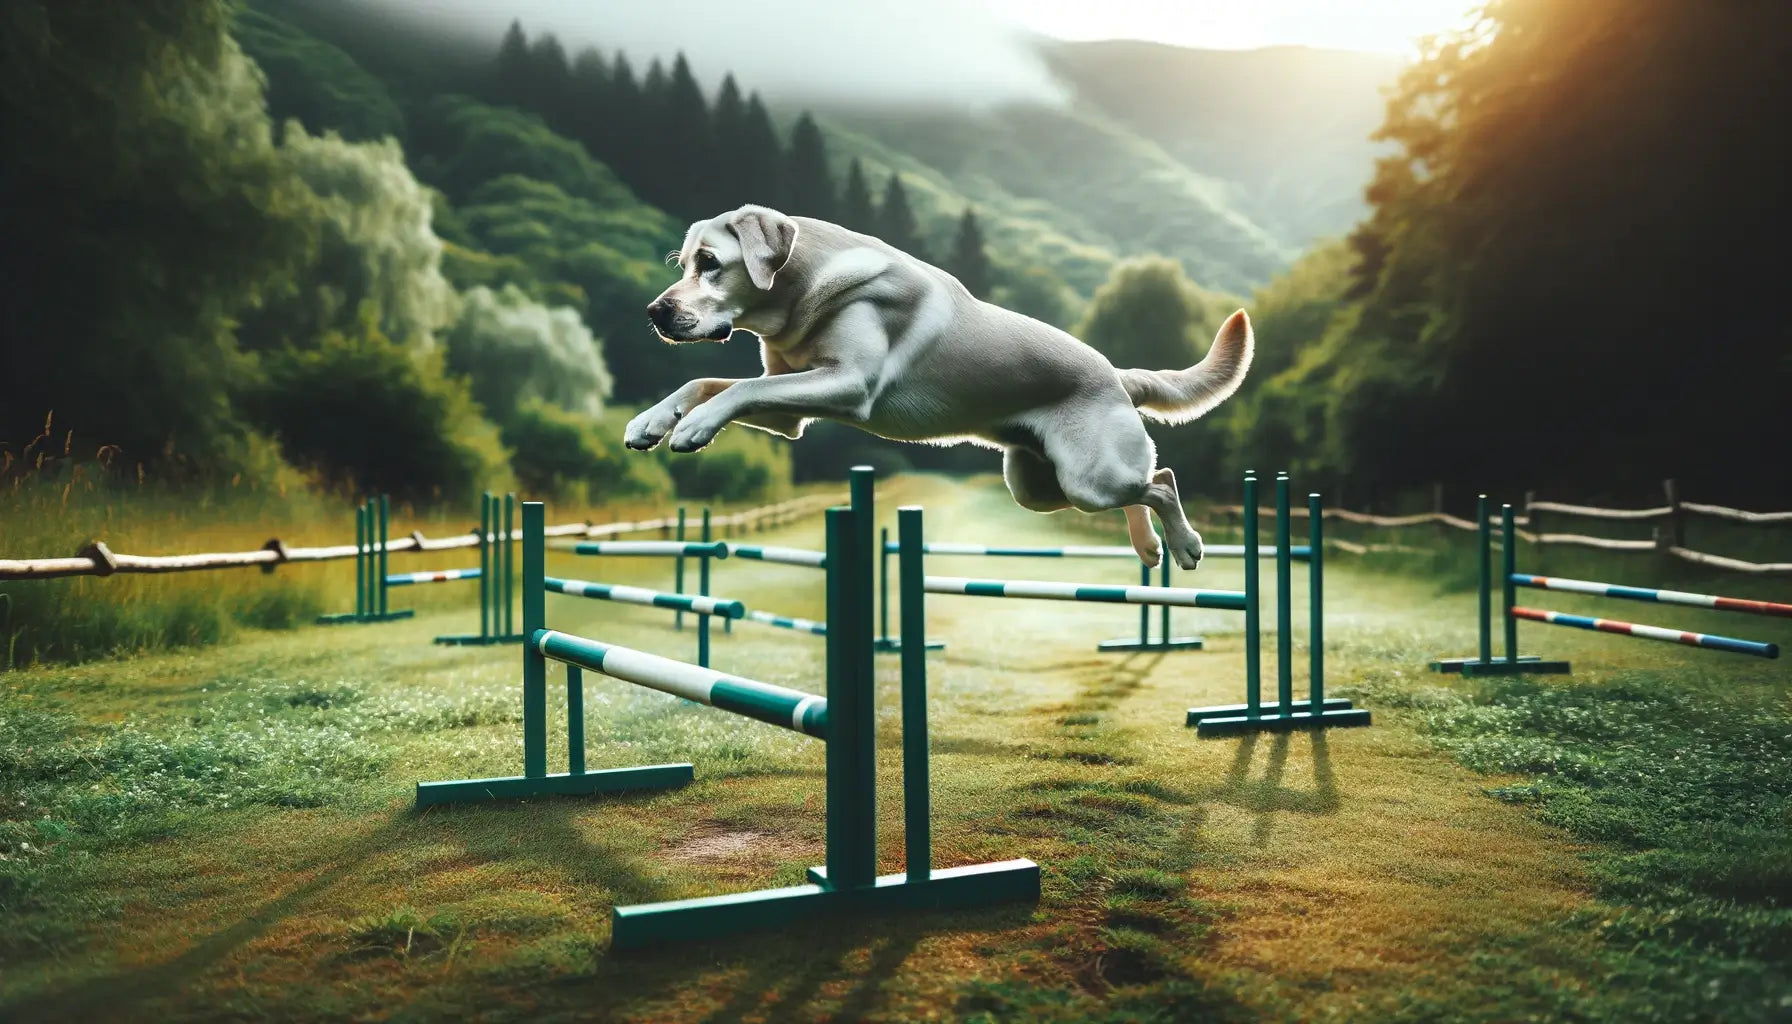 A Silver Lab engaged in training or exercise, showcasing its activity and focus.